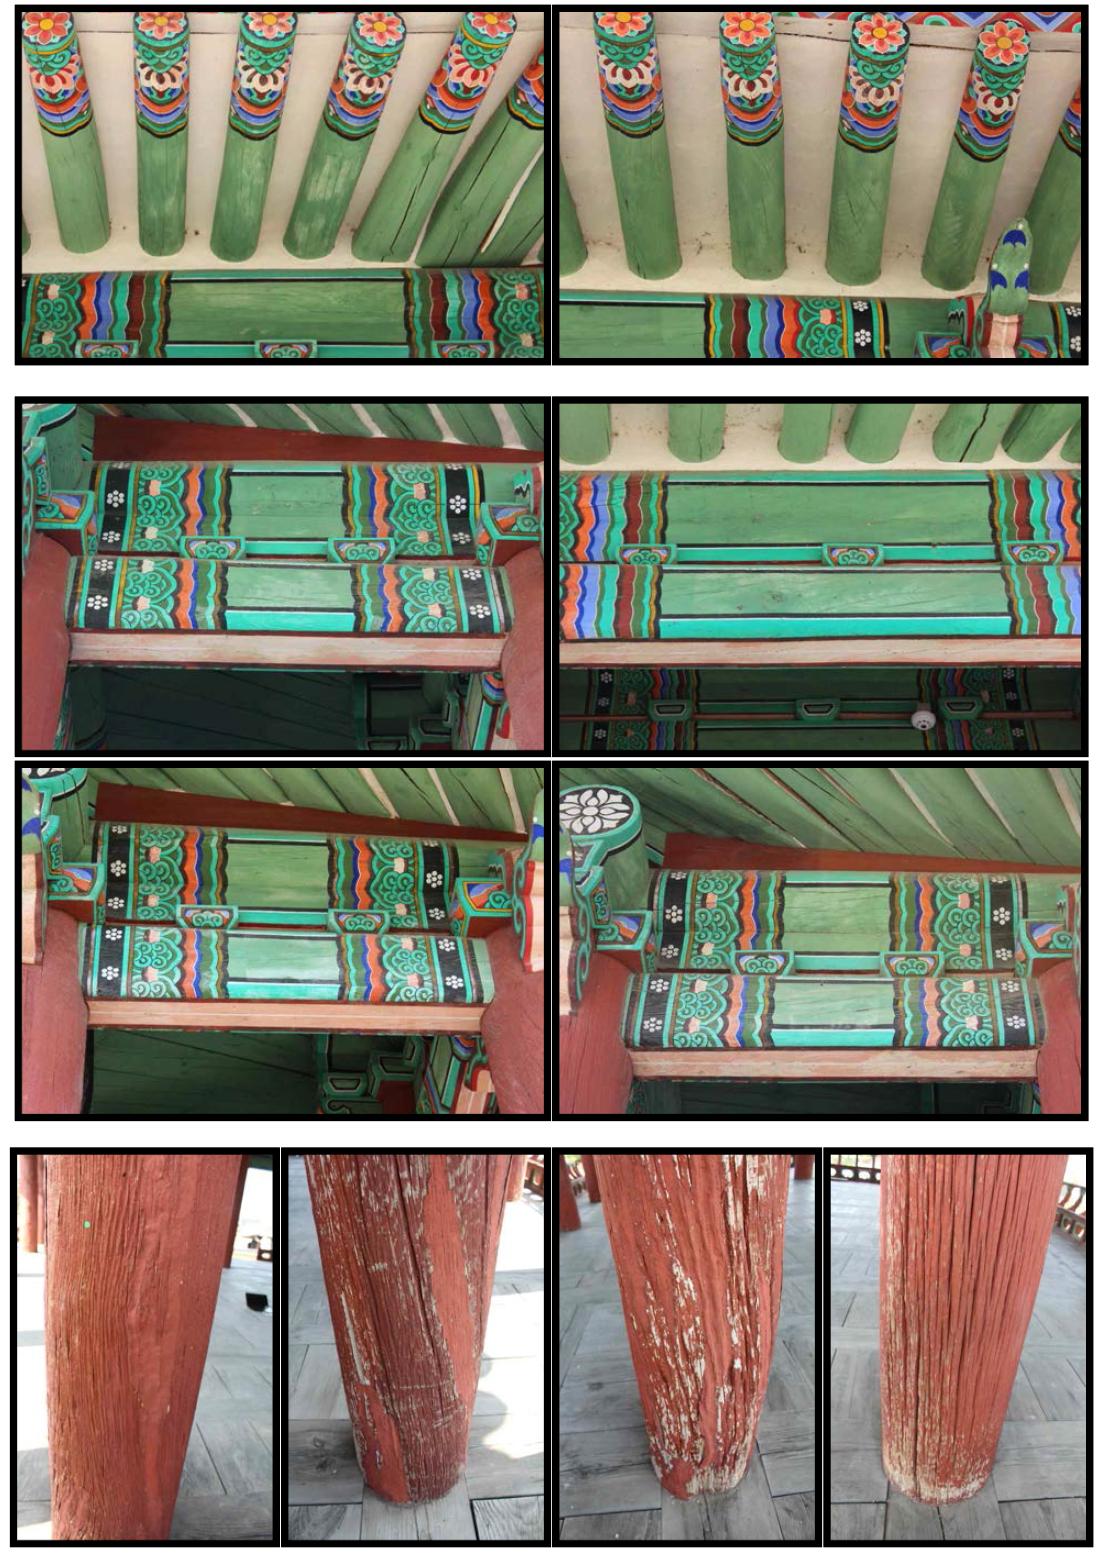 Problems of Pihyangjeong Pavilion.